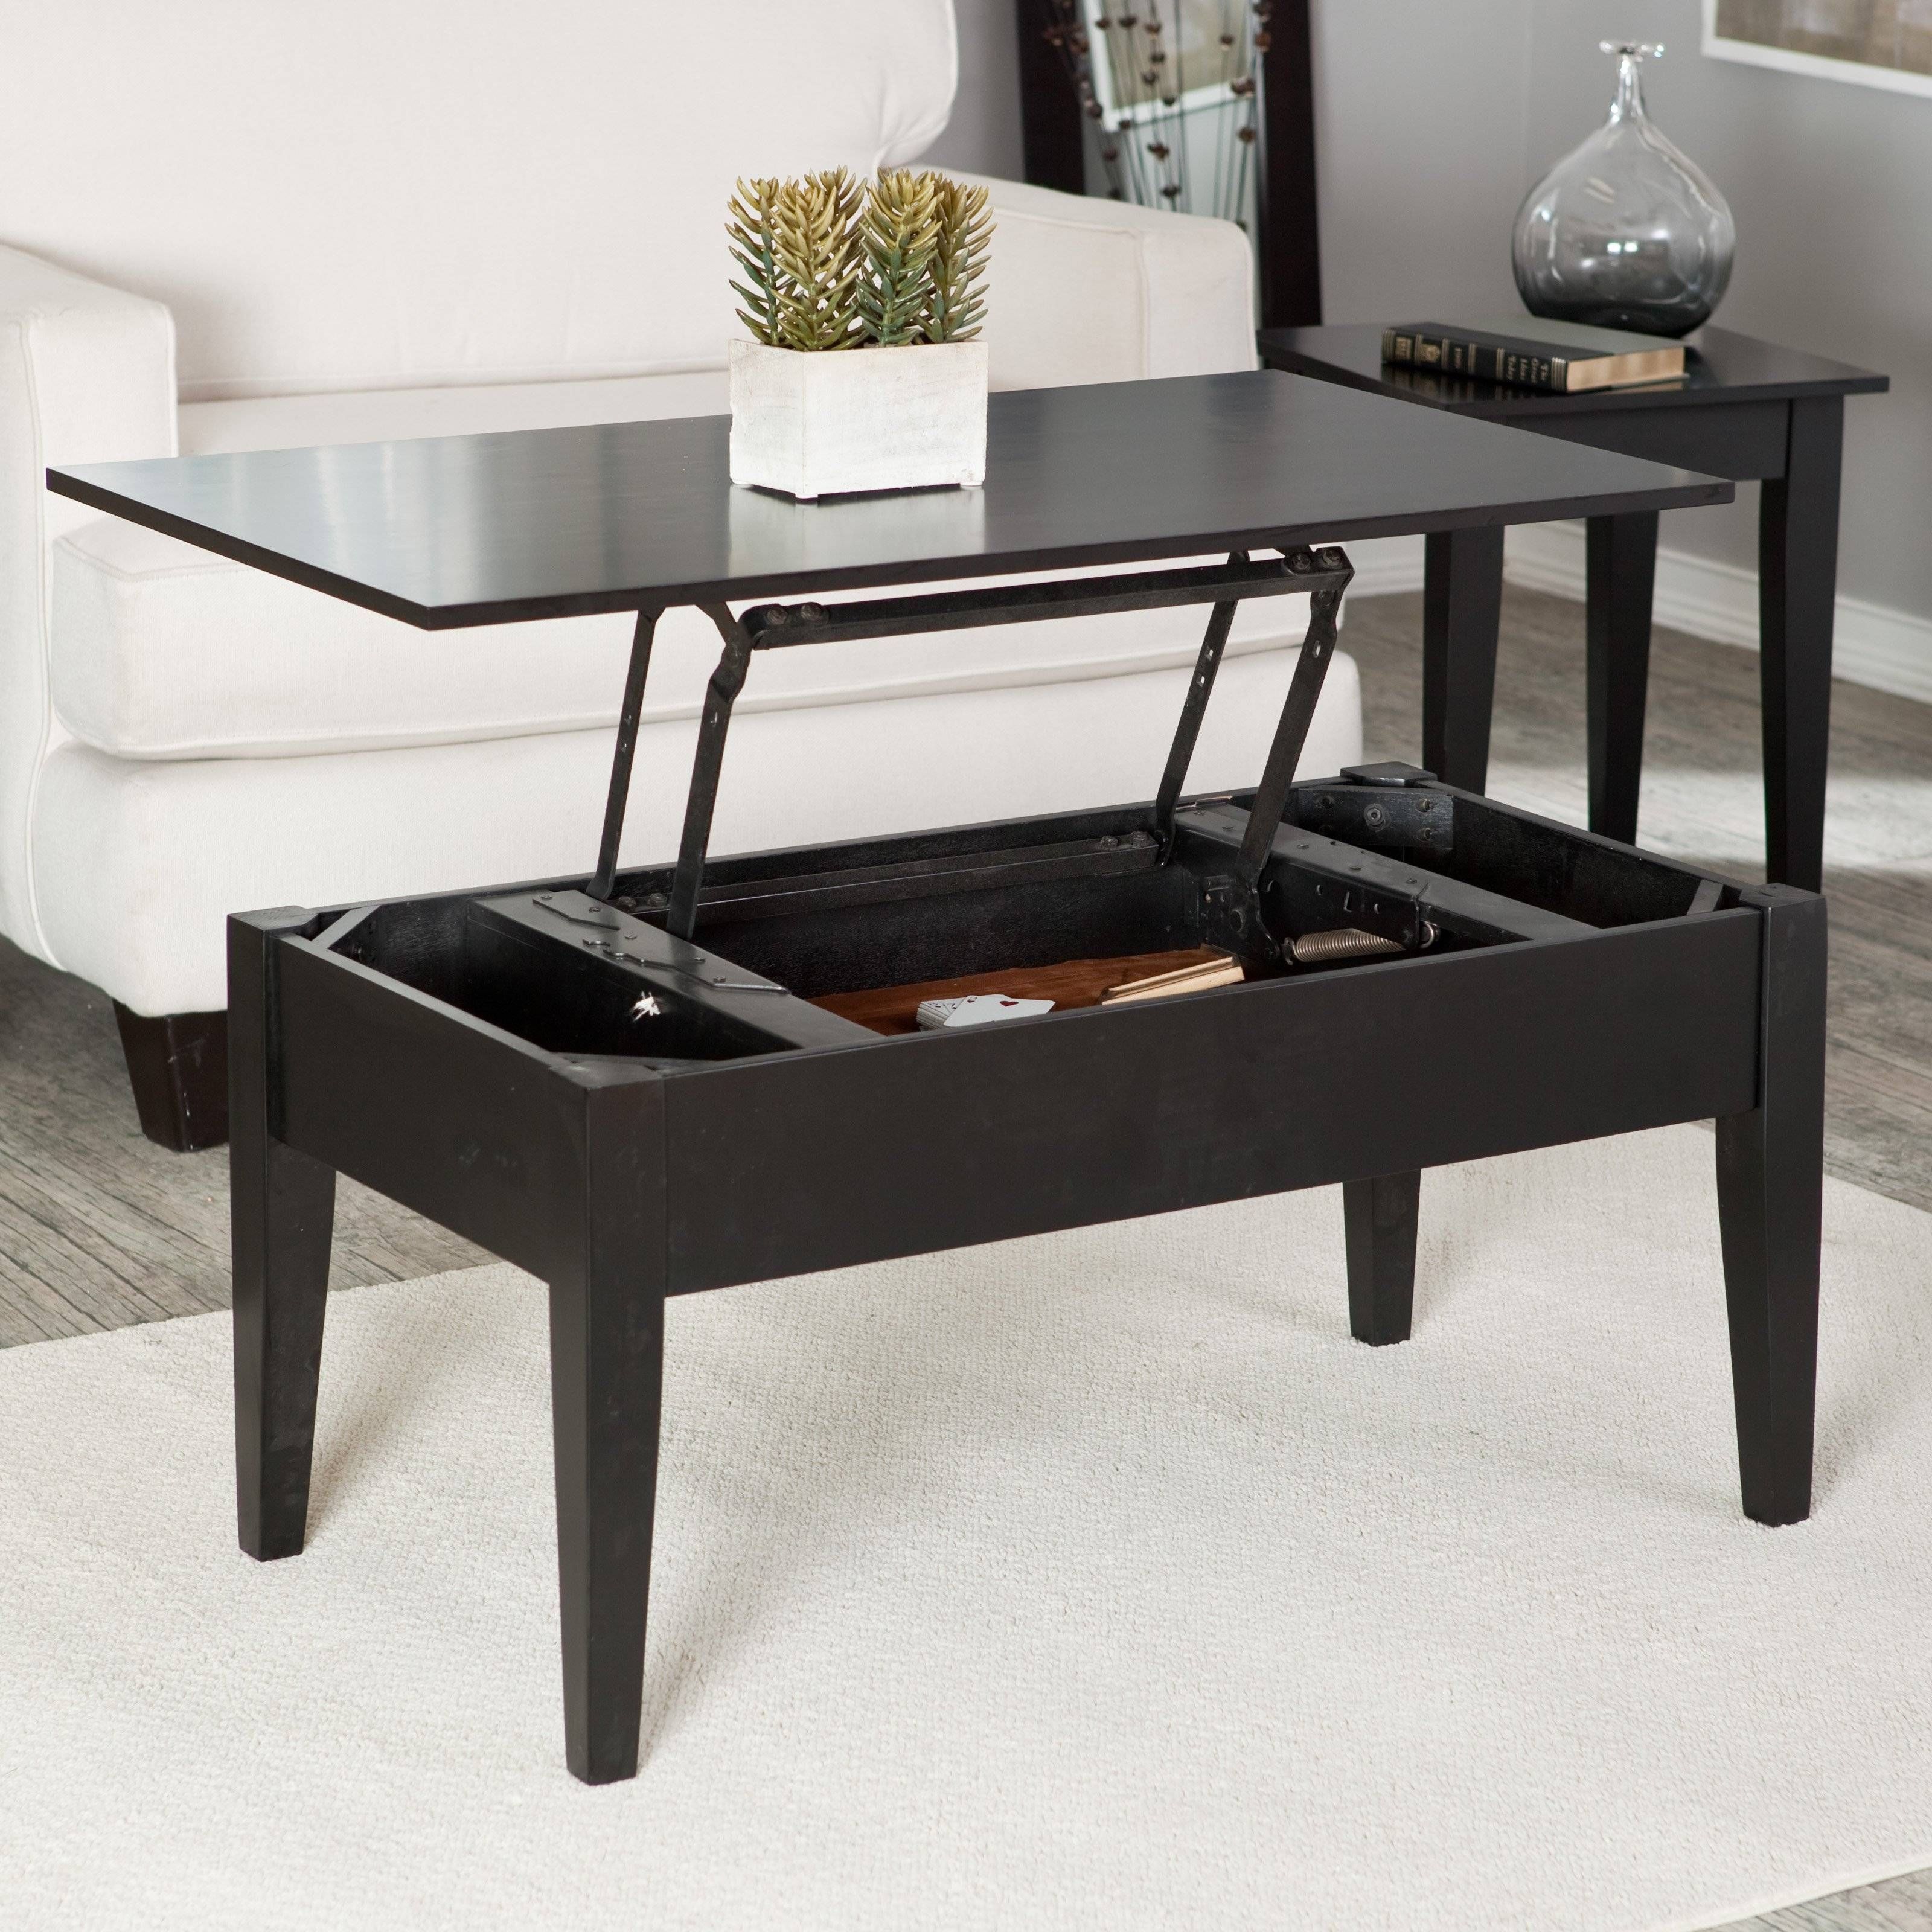 Turner Lift Top Coffee Table – Espresso | Hayneedle For Coffee Tables Top Lifts Up (View 1 of 30)